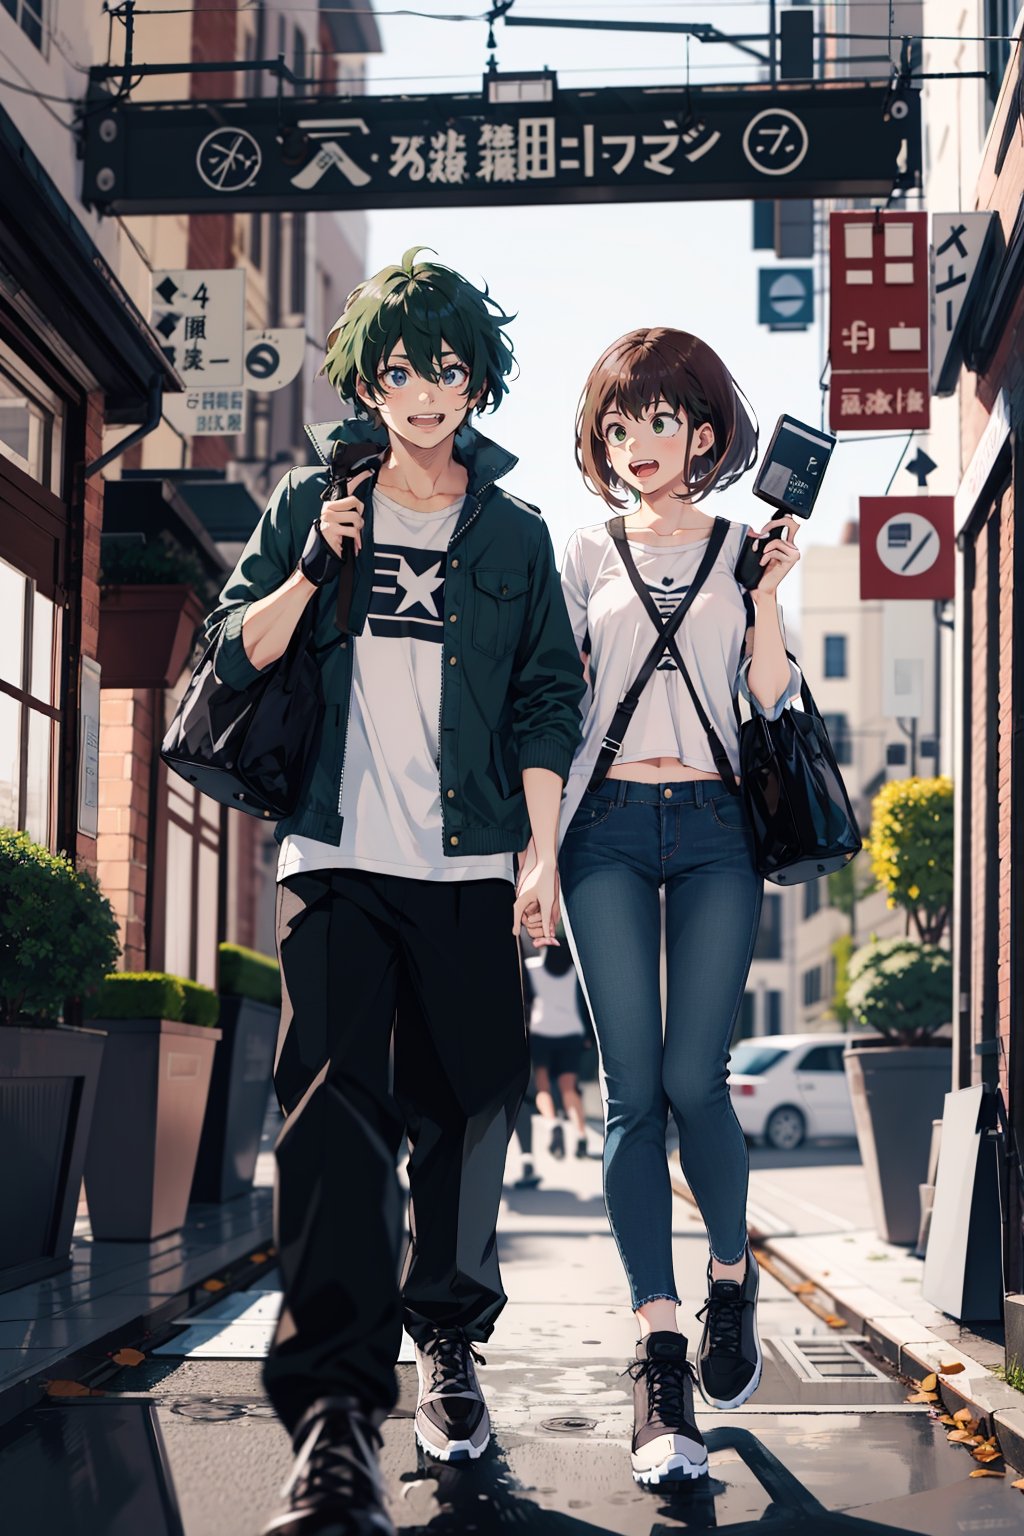 Masterpiece, best quality, digital illustration, extremely detailed, official art, best anime Artist, 
A girl and a boy posing for a photo.
on the left1girl, brown hair, bob cut, AND, [SEP]
On the right 1boy, midoriya izuku, short green hair, green eyes 